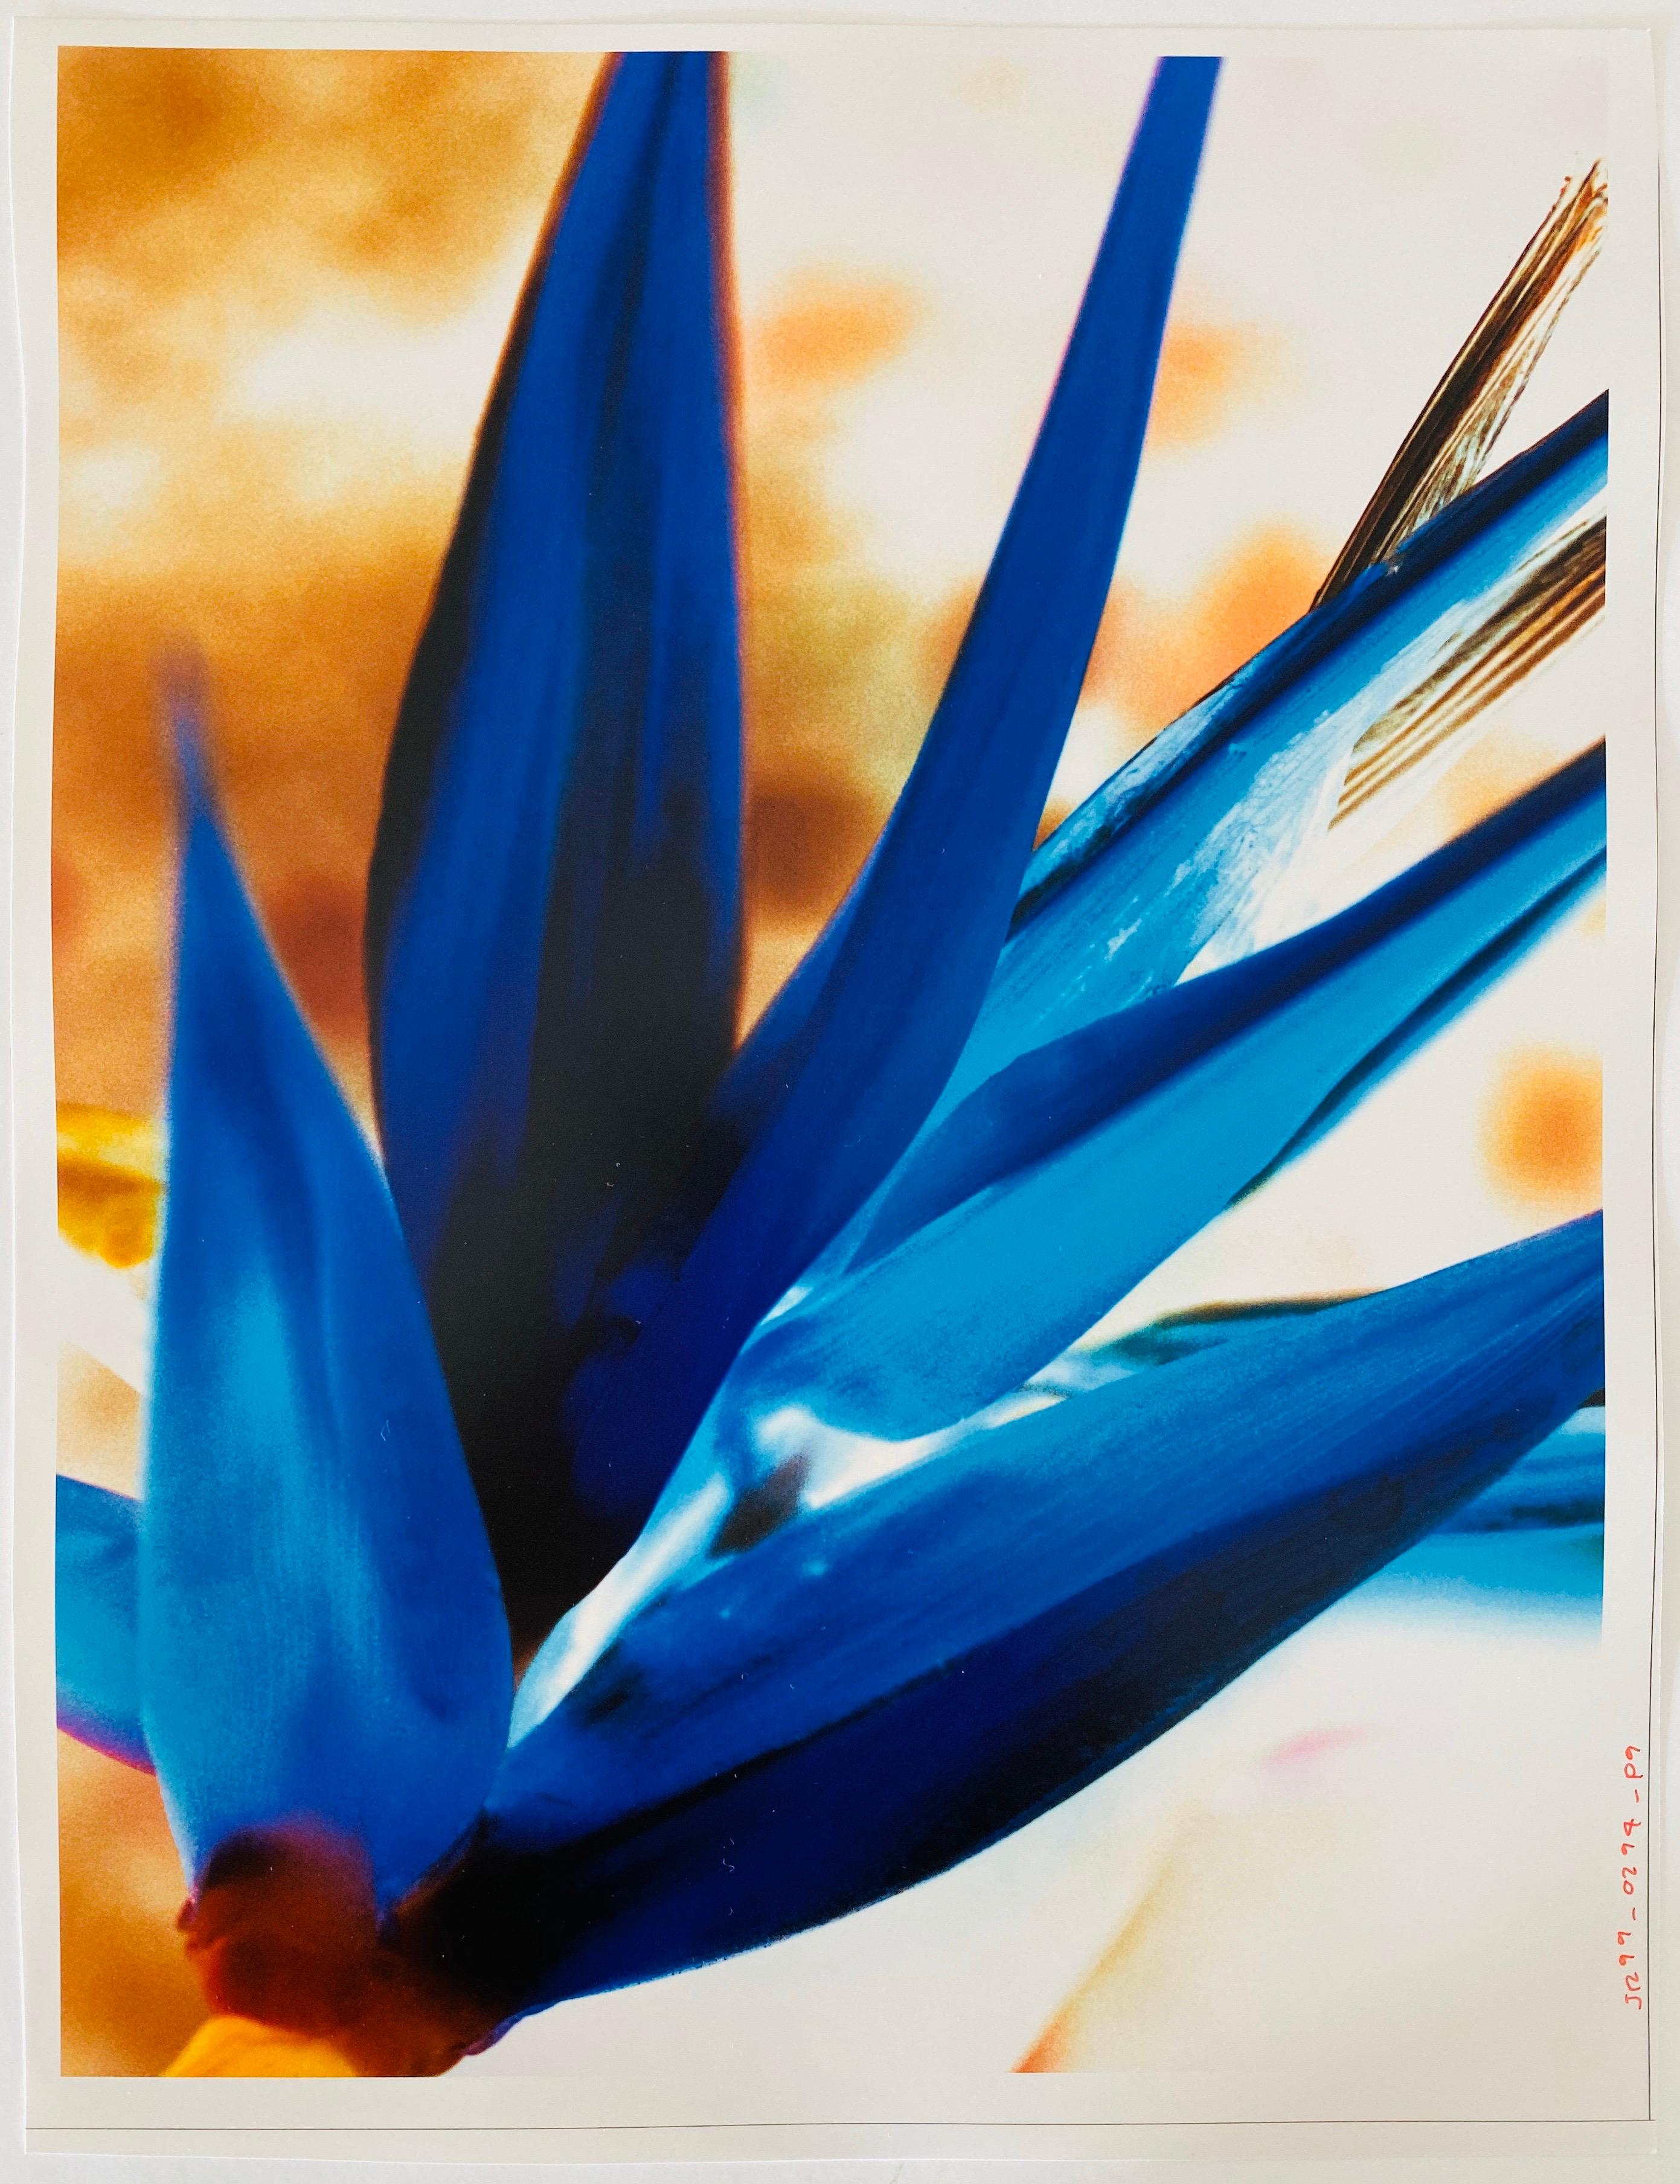 FLORA & FAUNA SERIES, c.1998, Fuji crystal archive paper. Unsigned.

Photographer Jeffrey Rothstein focuses on different elements within Nature for his subject matter, ranging from flowers and plants to desert sands as well as the ocean and stars.